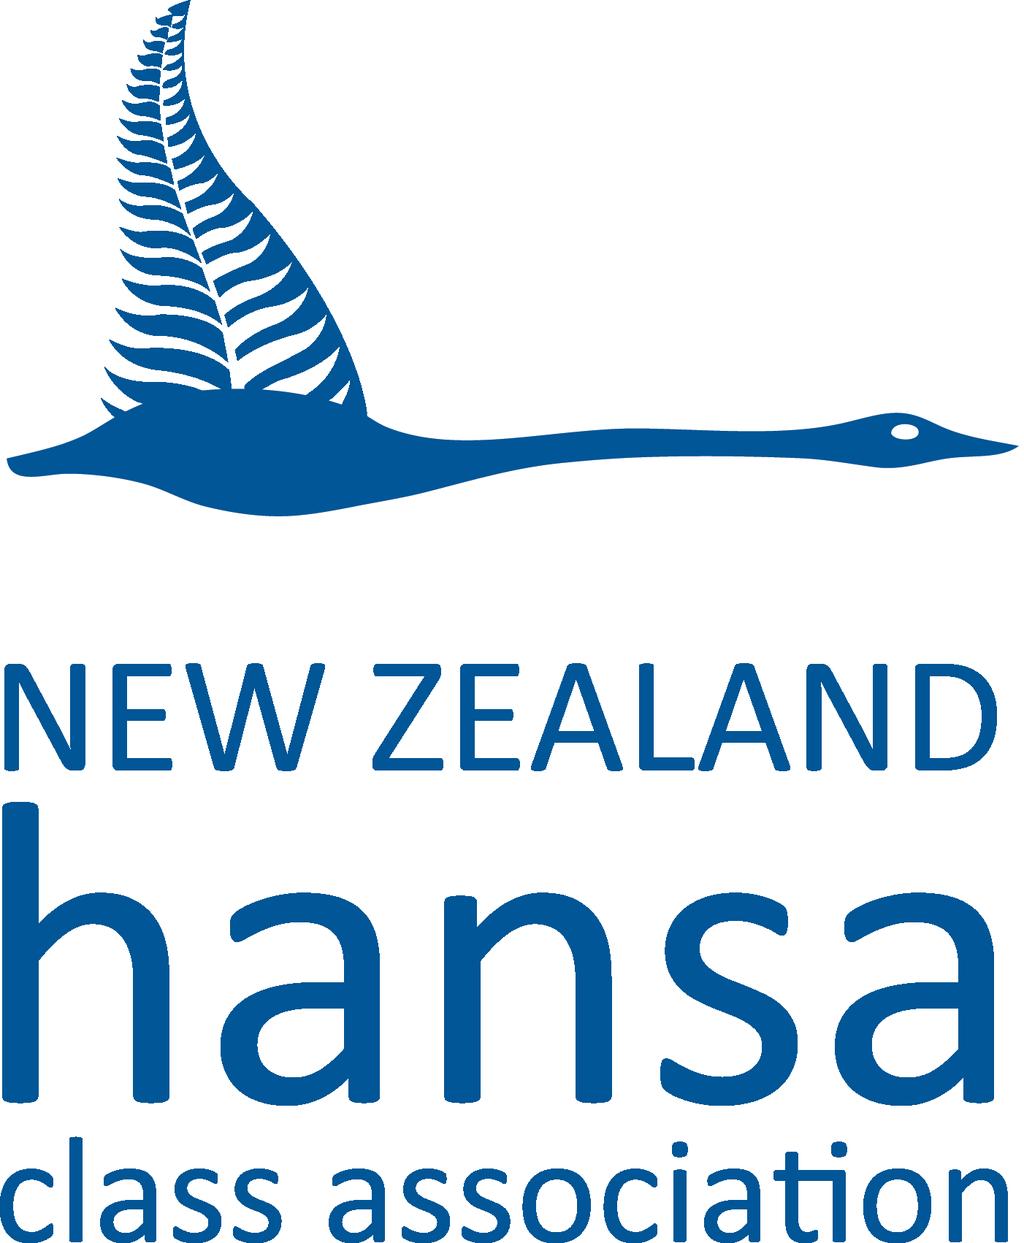 nz Lake Taupo Yacht Club invites sailors to participate in their